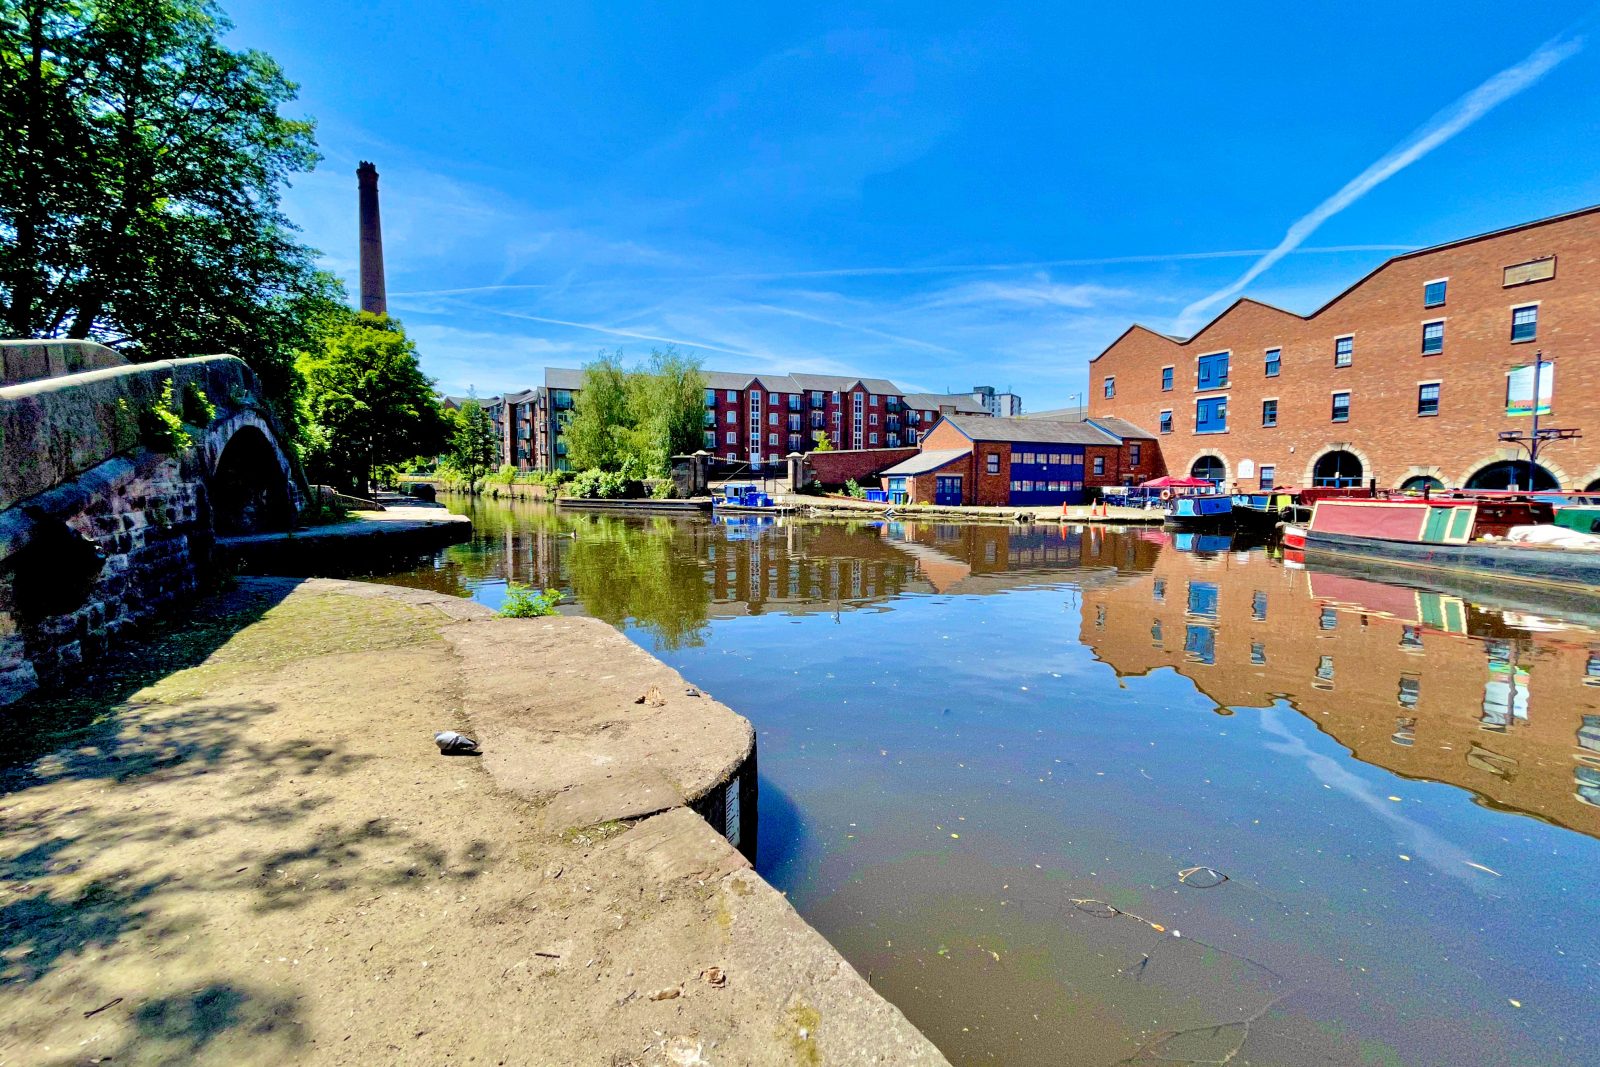 The Peak Forest Canal ends at Dukinfield Junction, where it meets the Ashton Canal opposite the warehouse now housing Portland Basin Museum.